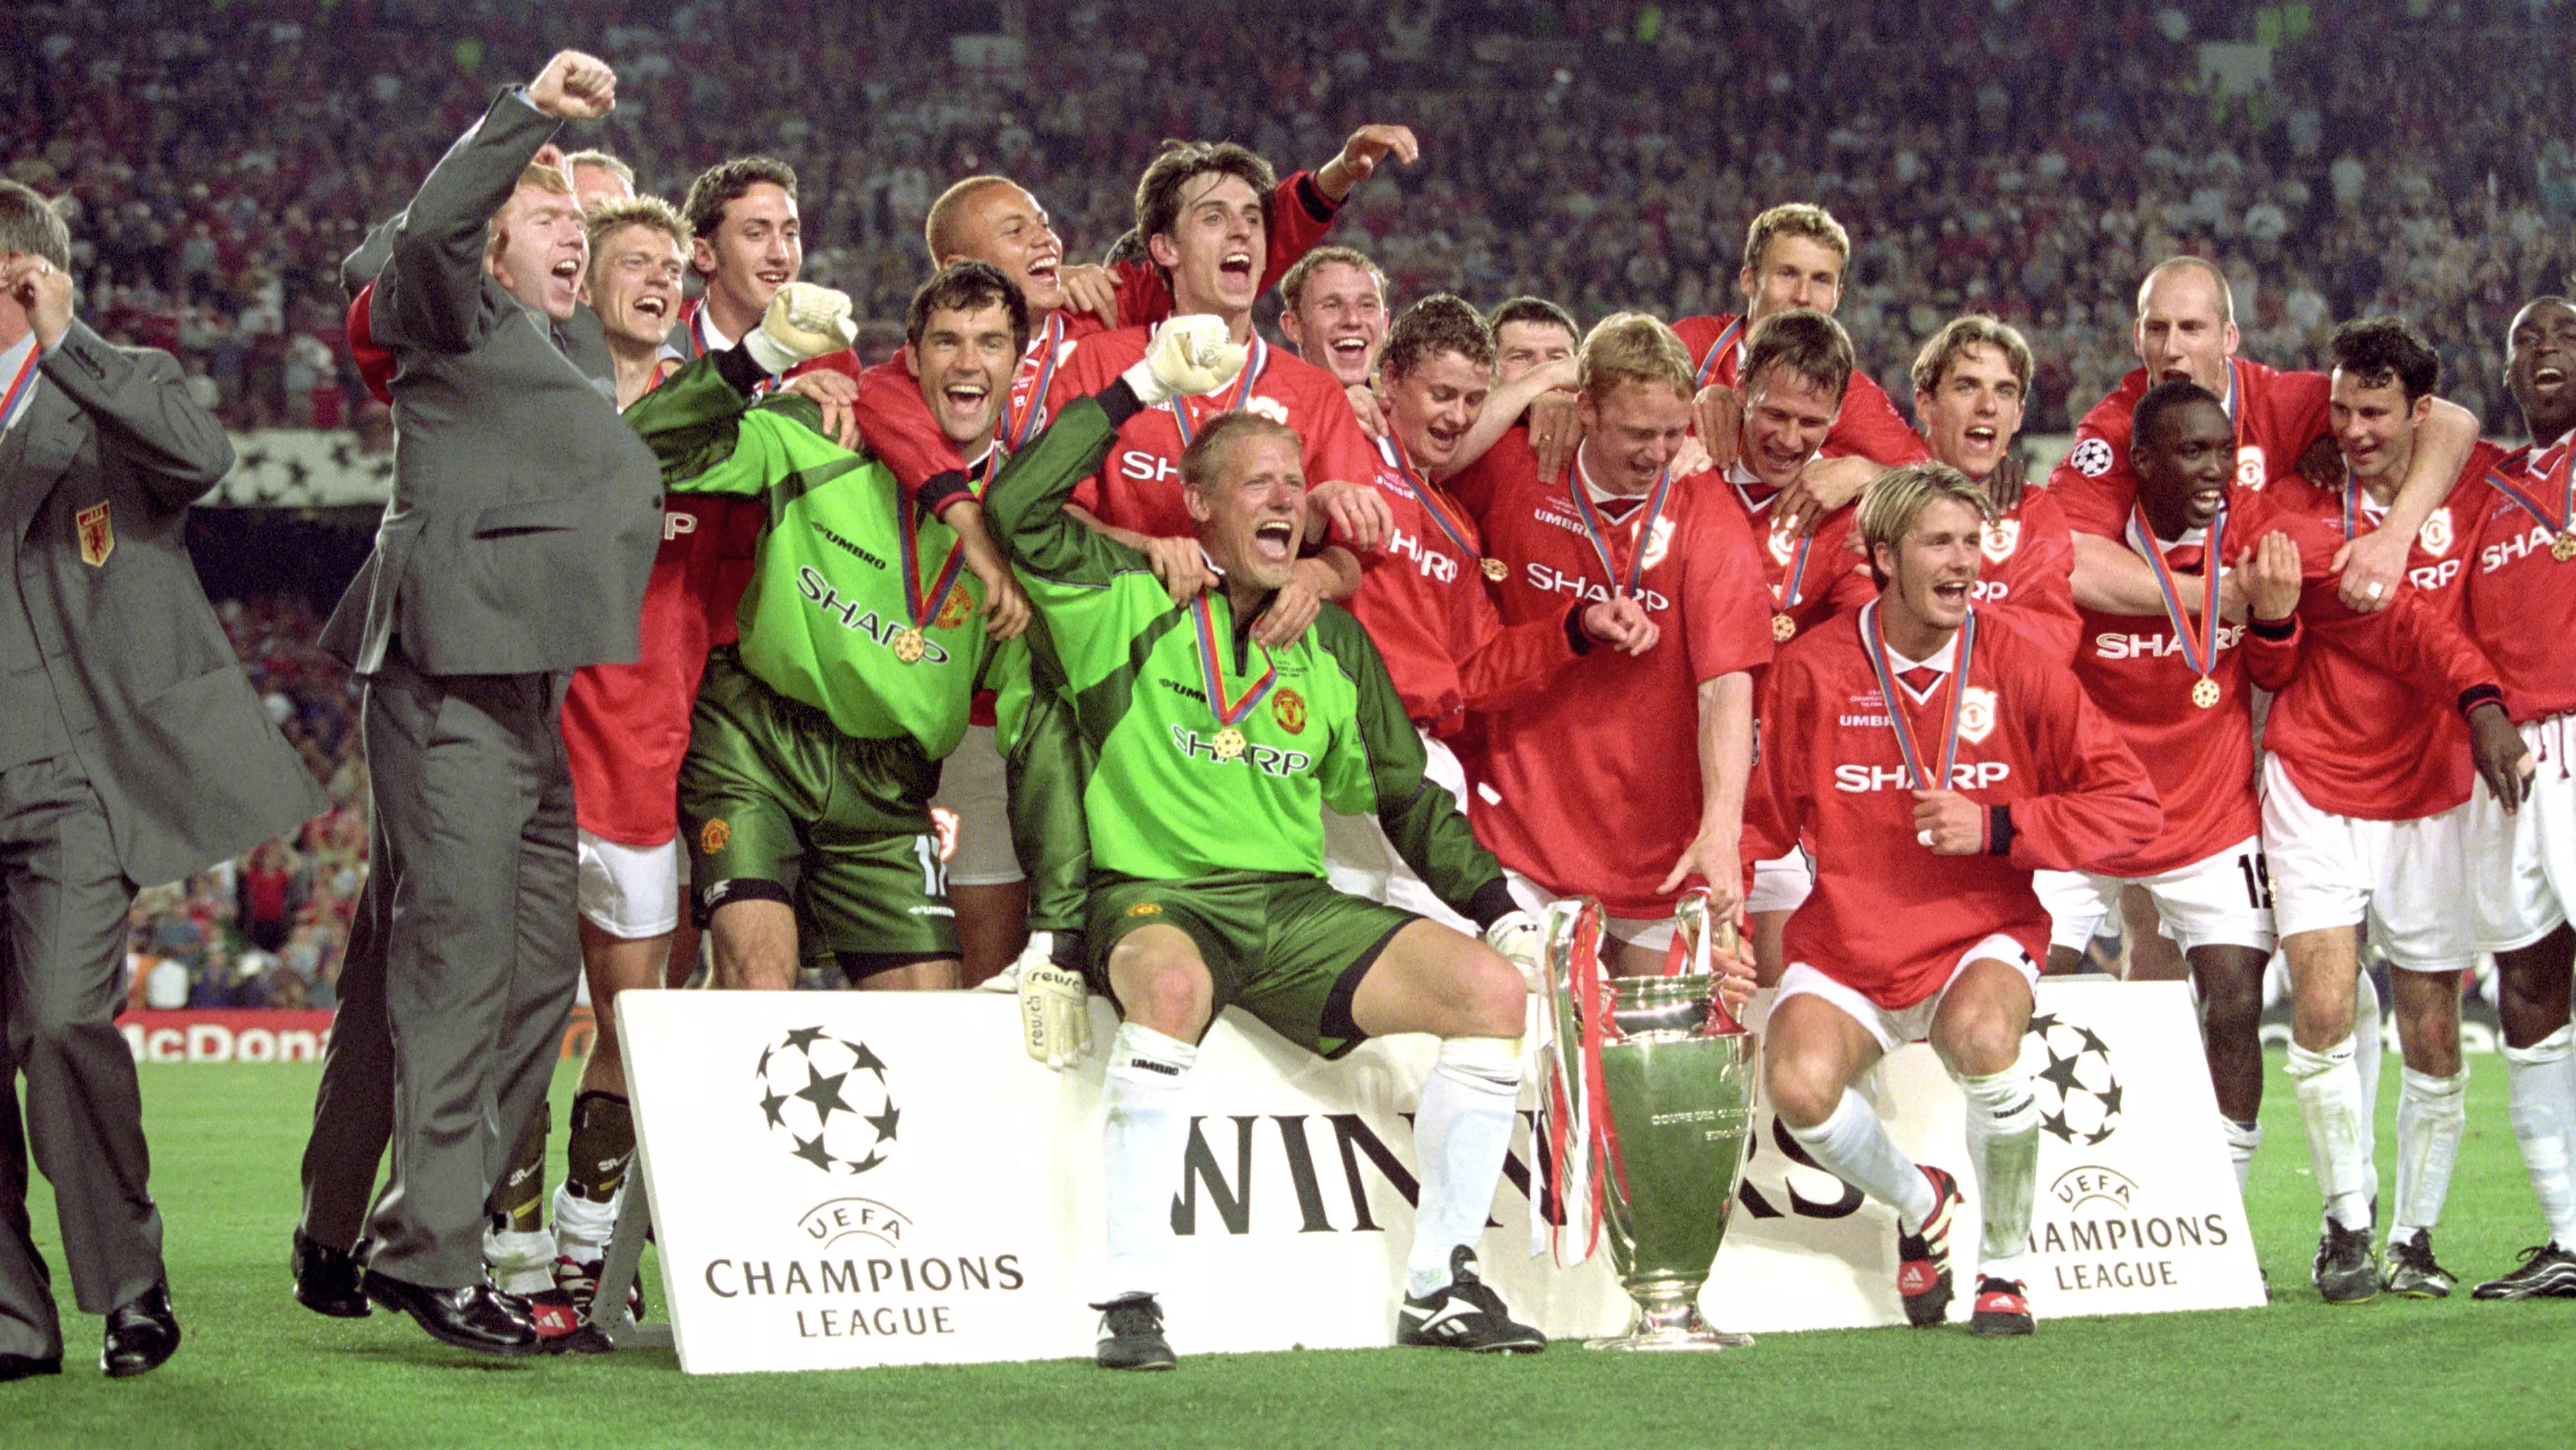 Manchester United's Treble Winners Are Statistically The Worst Champions League Winners